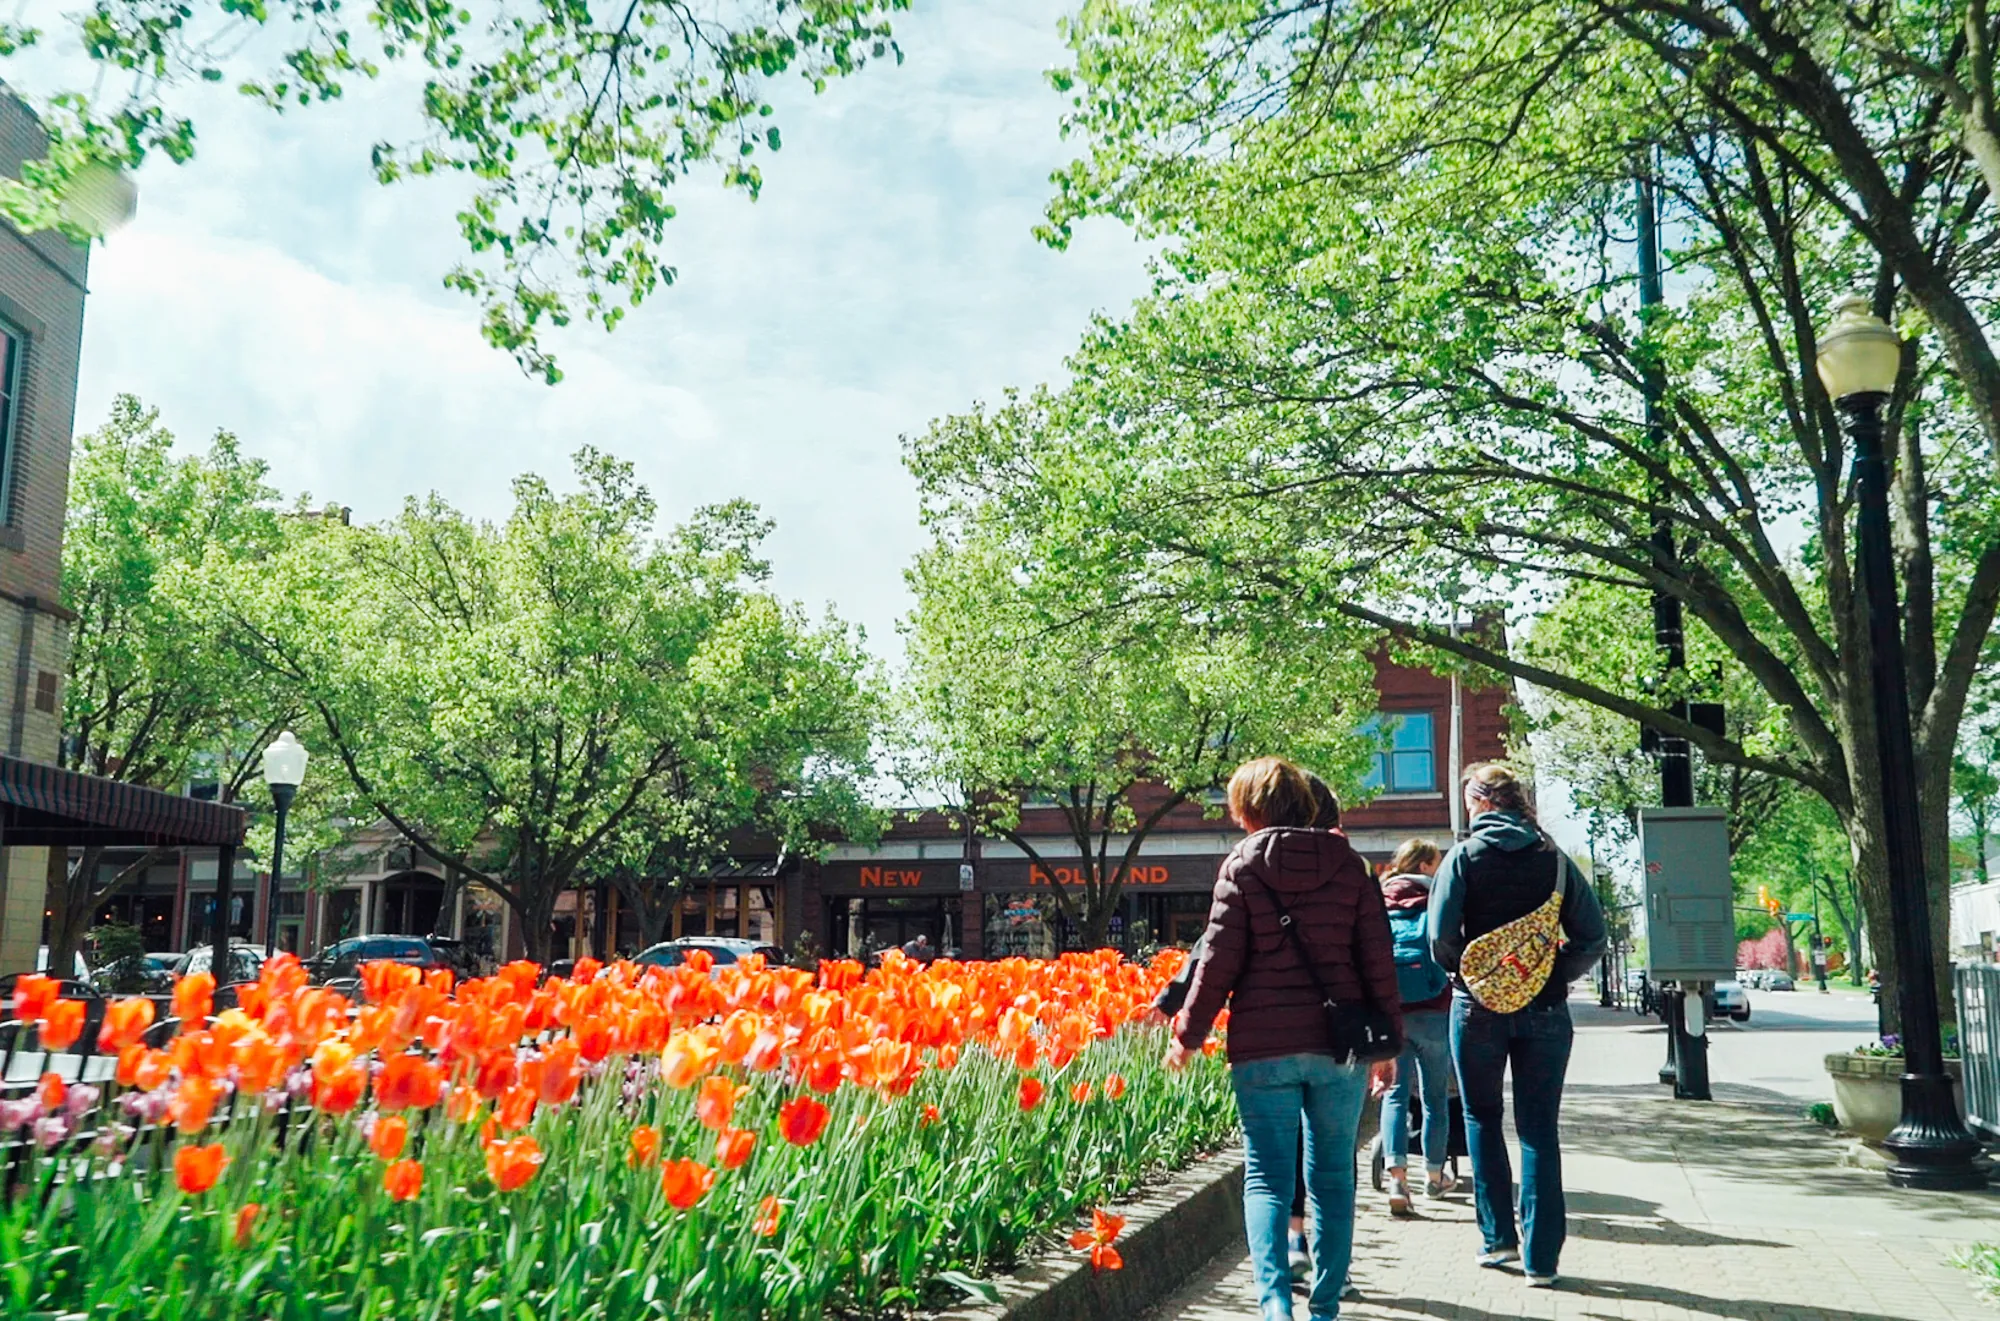 People walking by the tulips in bloom in downtown Holland, MI